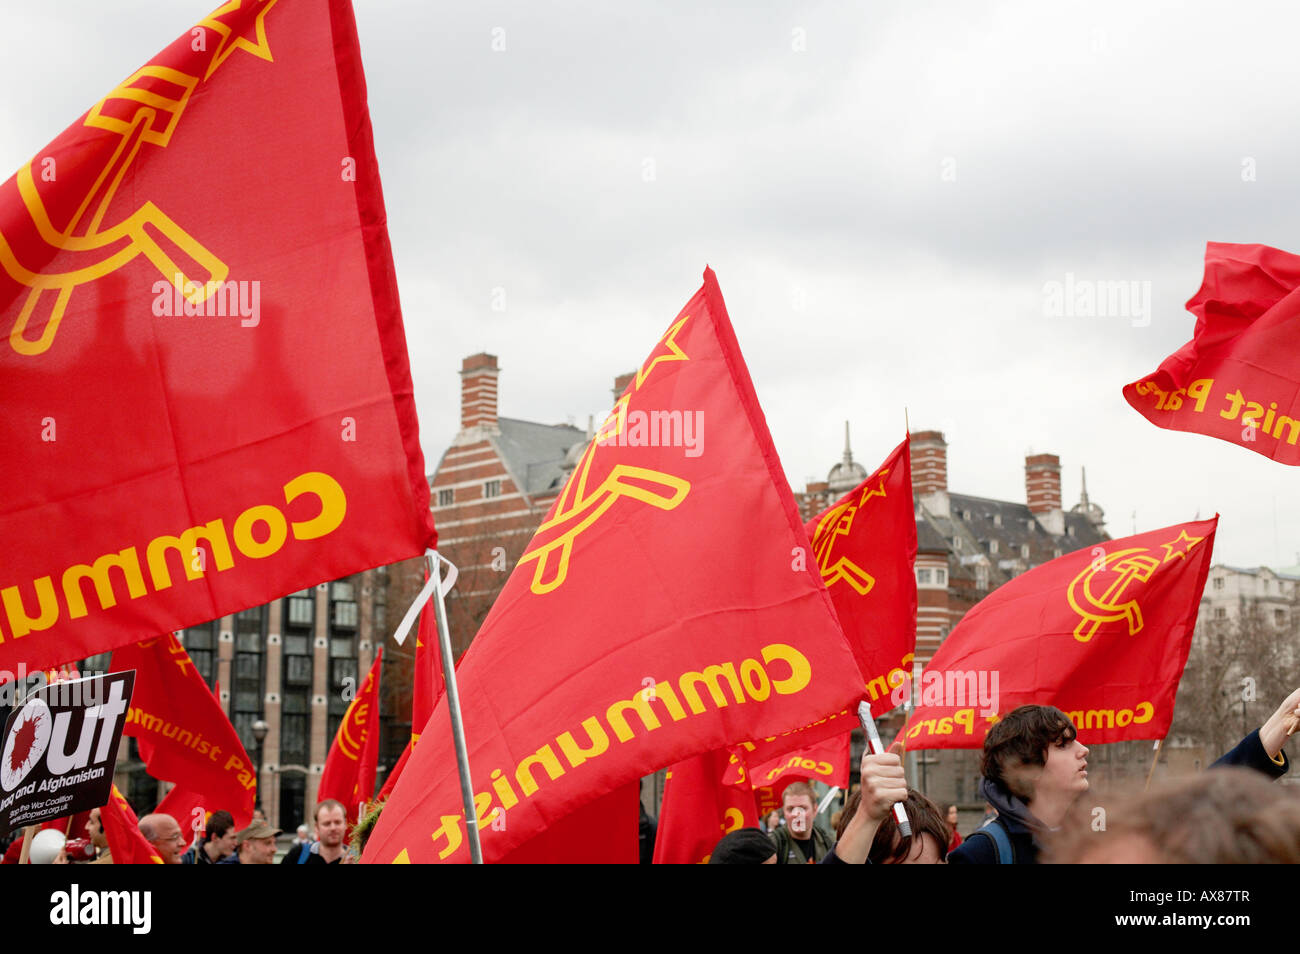 Communist flags waving at an Anti War rally in London UK Stock Photo